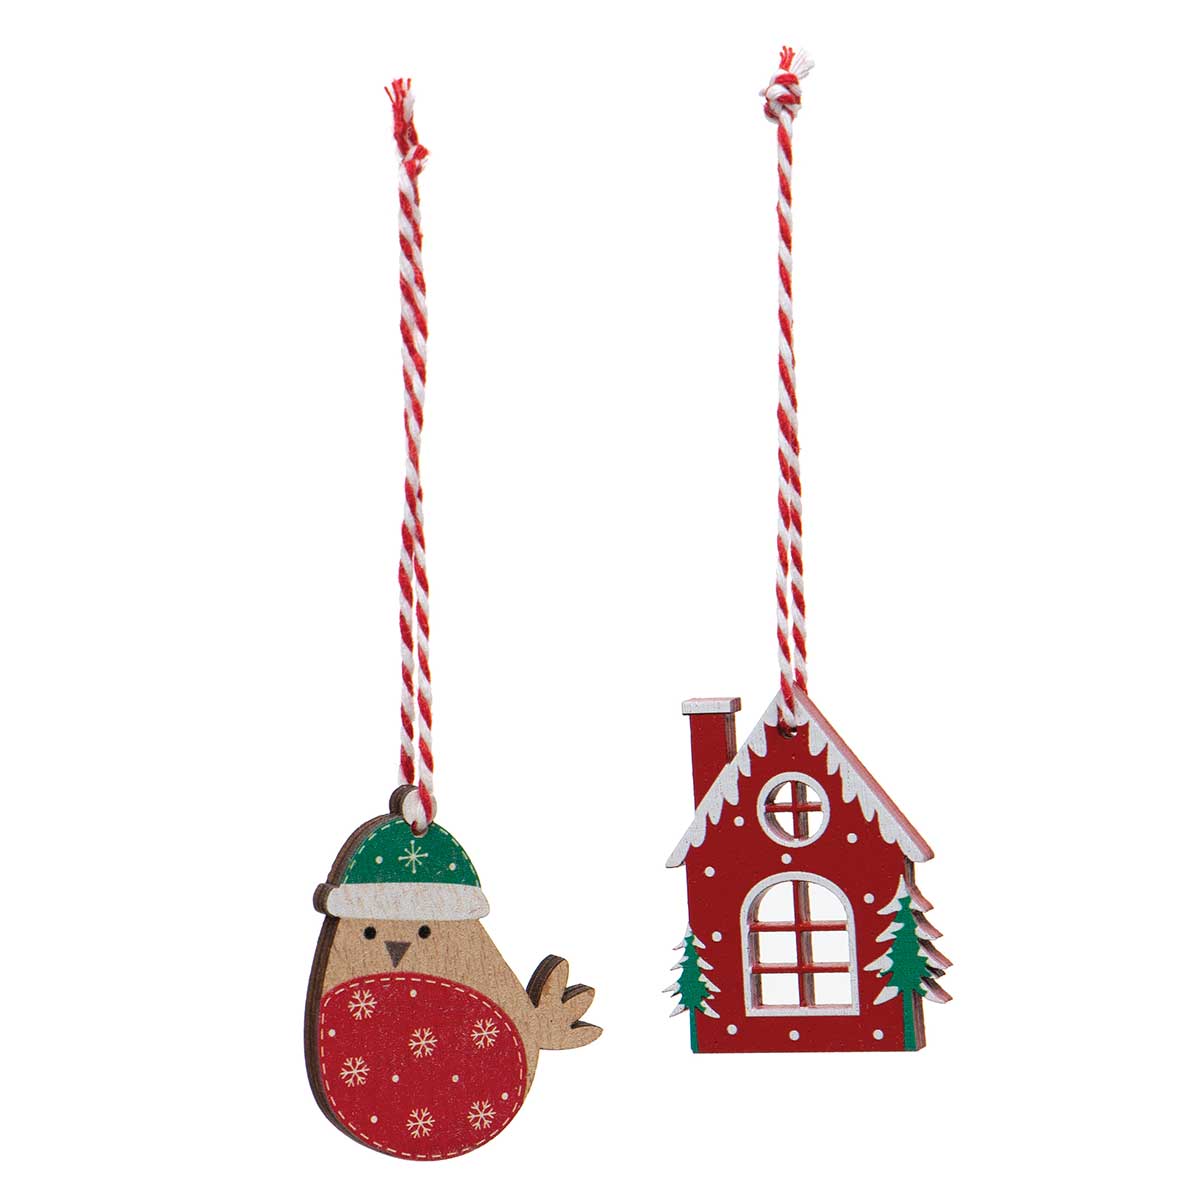 !ALPINE HOUSE AND BIRD WOOD ORNAMENT RED/GREEN WITH